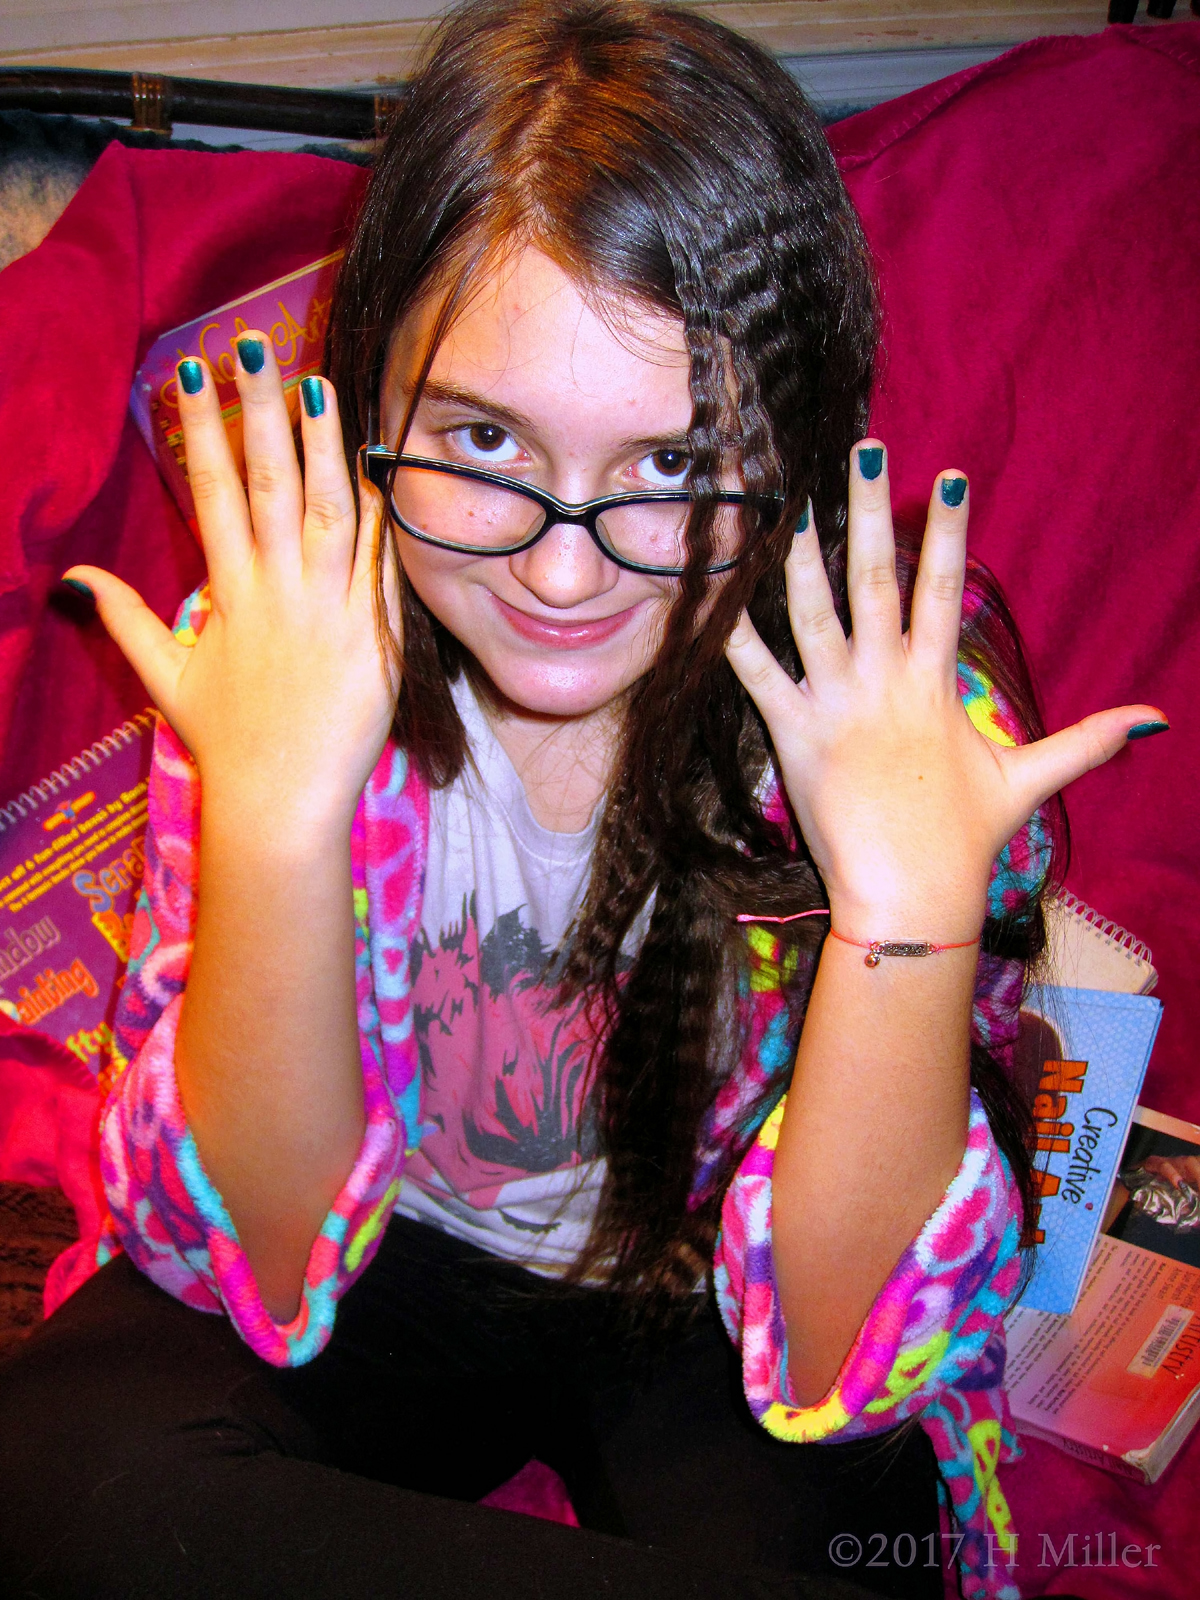 Classic Kids Mani And Crimped Girls Hairstyle Is So Much Fun! 